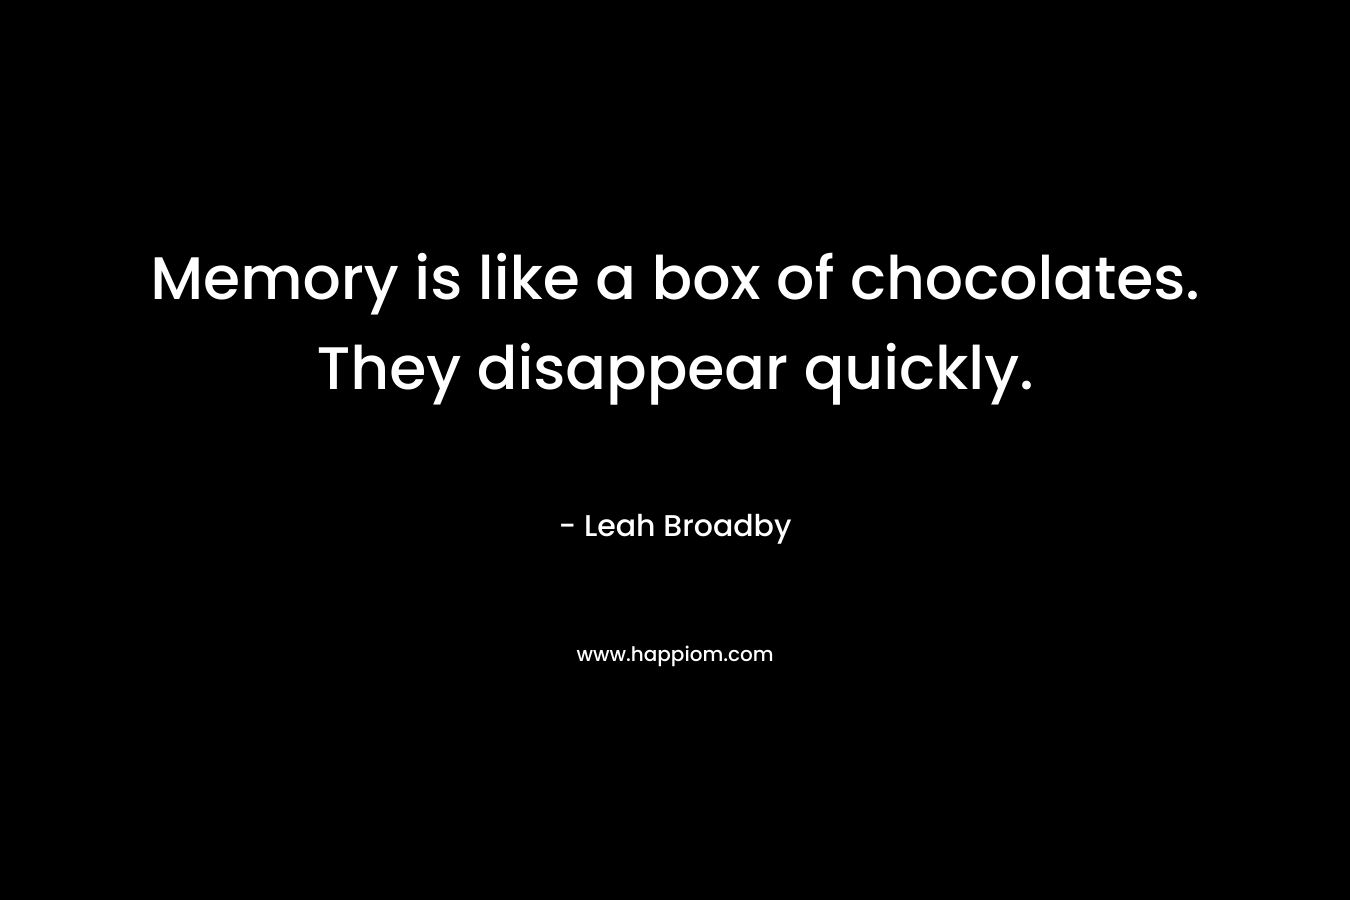 Memory is like a box of chocolates. They disappear quickly. – Leah Broadby